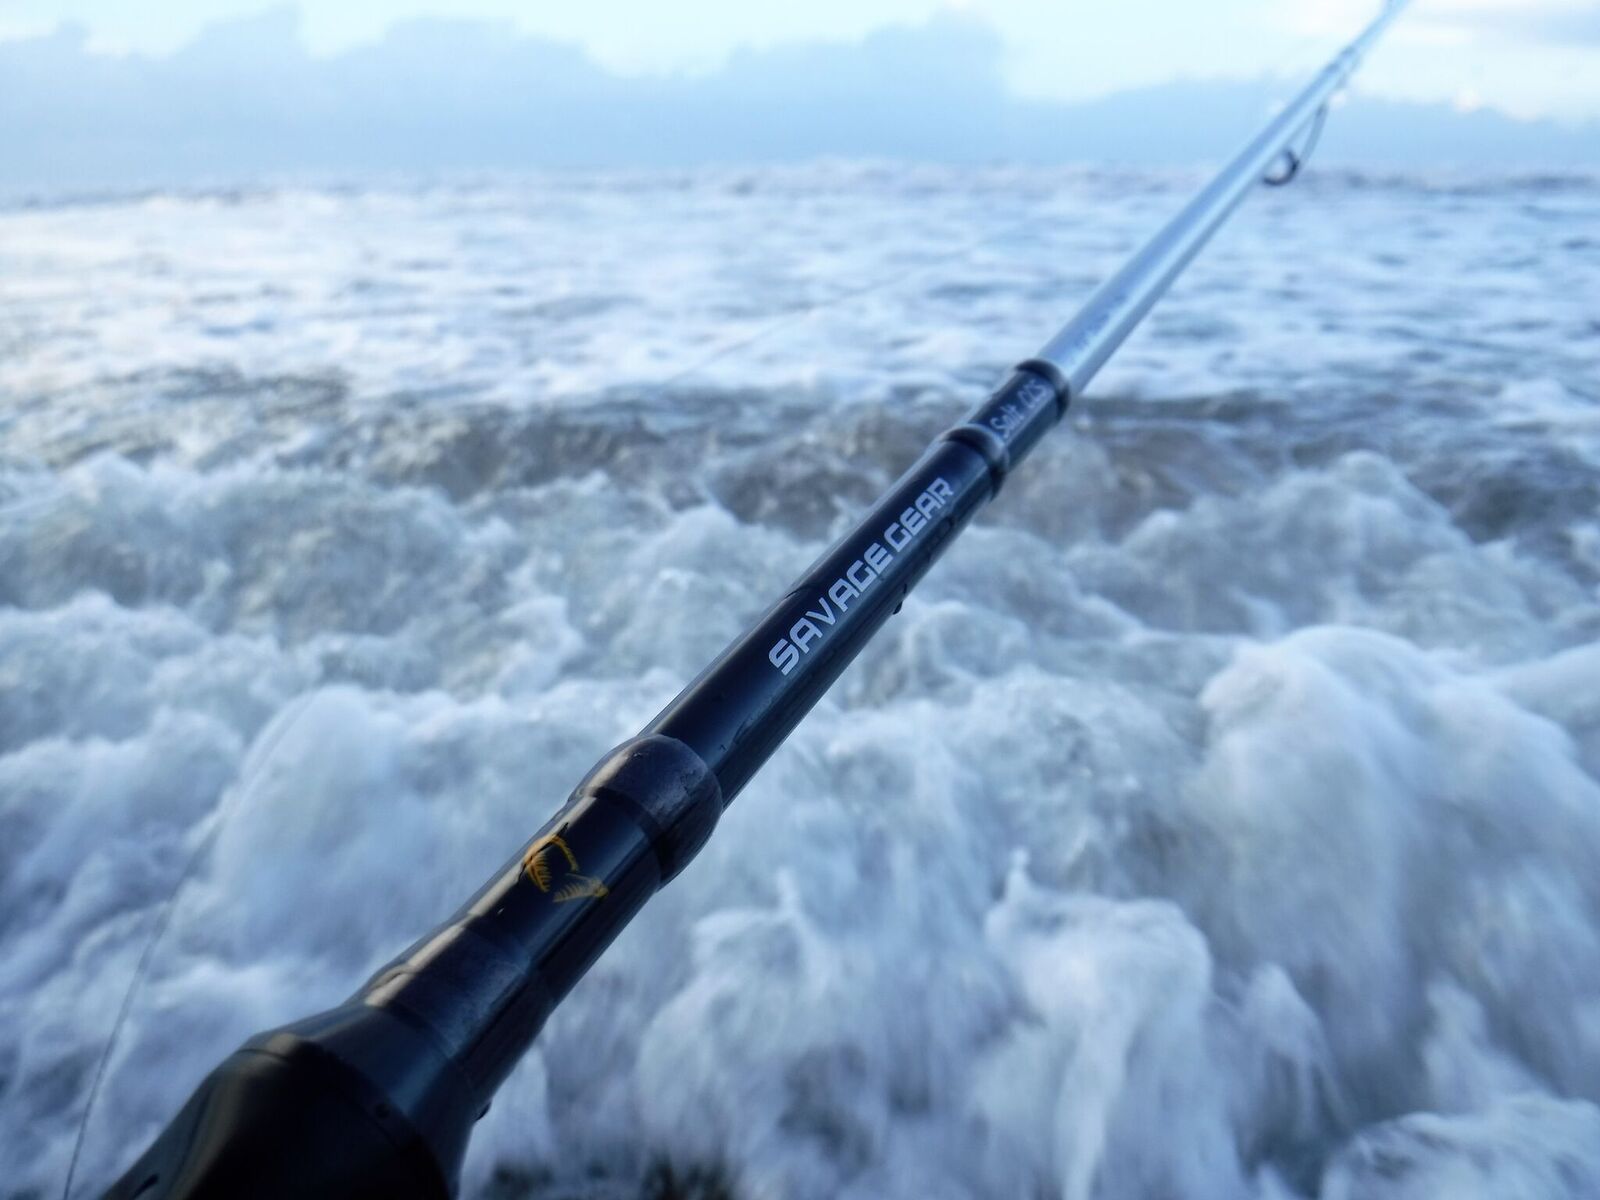 How the brand new 30g, 35g & 40g Savage Gear Surf Seekers came to